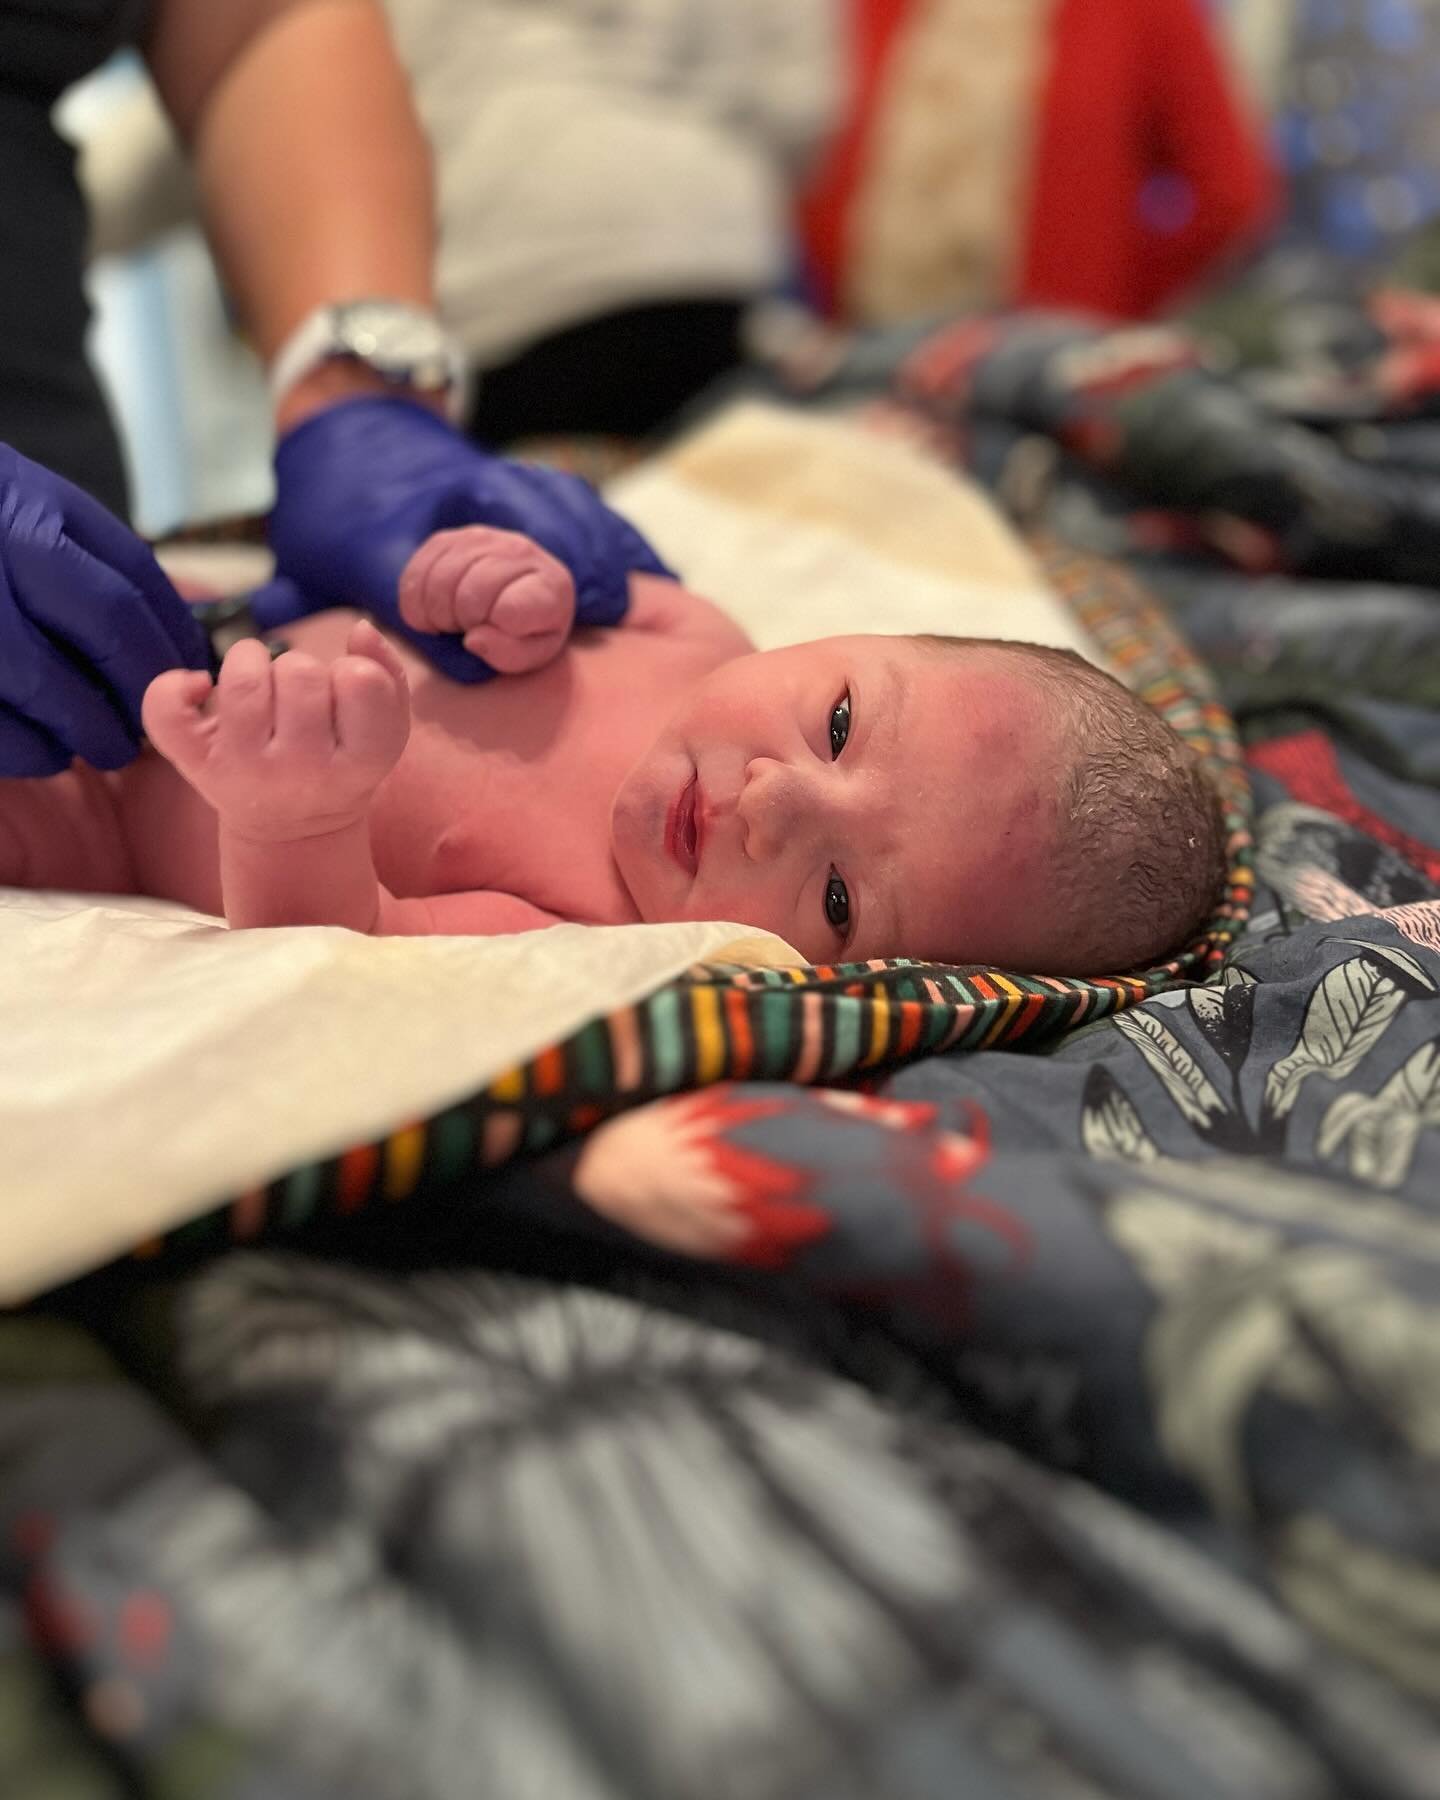 Join us in celebrating our freshest HAH baby!! This little cutie is Ellie and we&rsquo;re so excited she&rsquo;s here! She&rsquo;s her family&rsquo;s first baby and her mama was so amazing in giving birth to her at home! 
.
We witnessed her mama labo